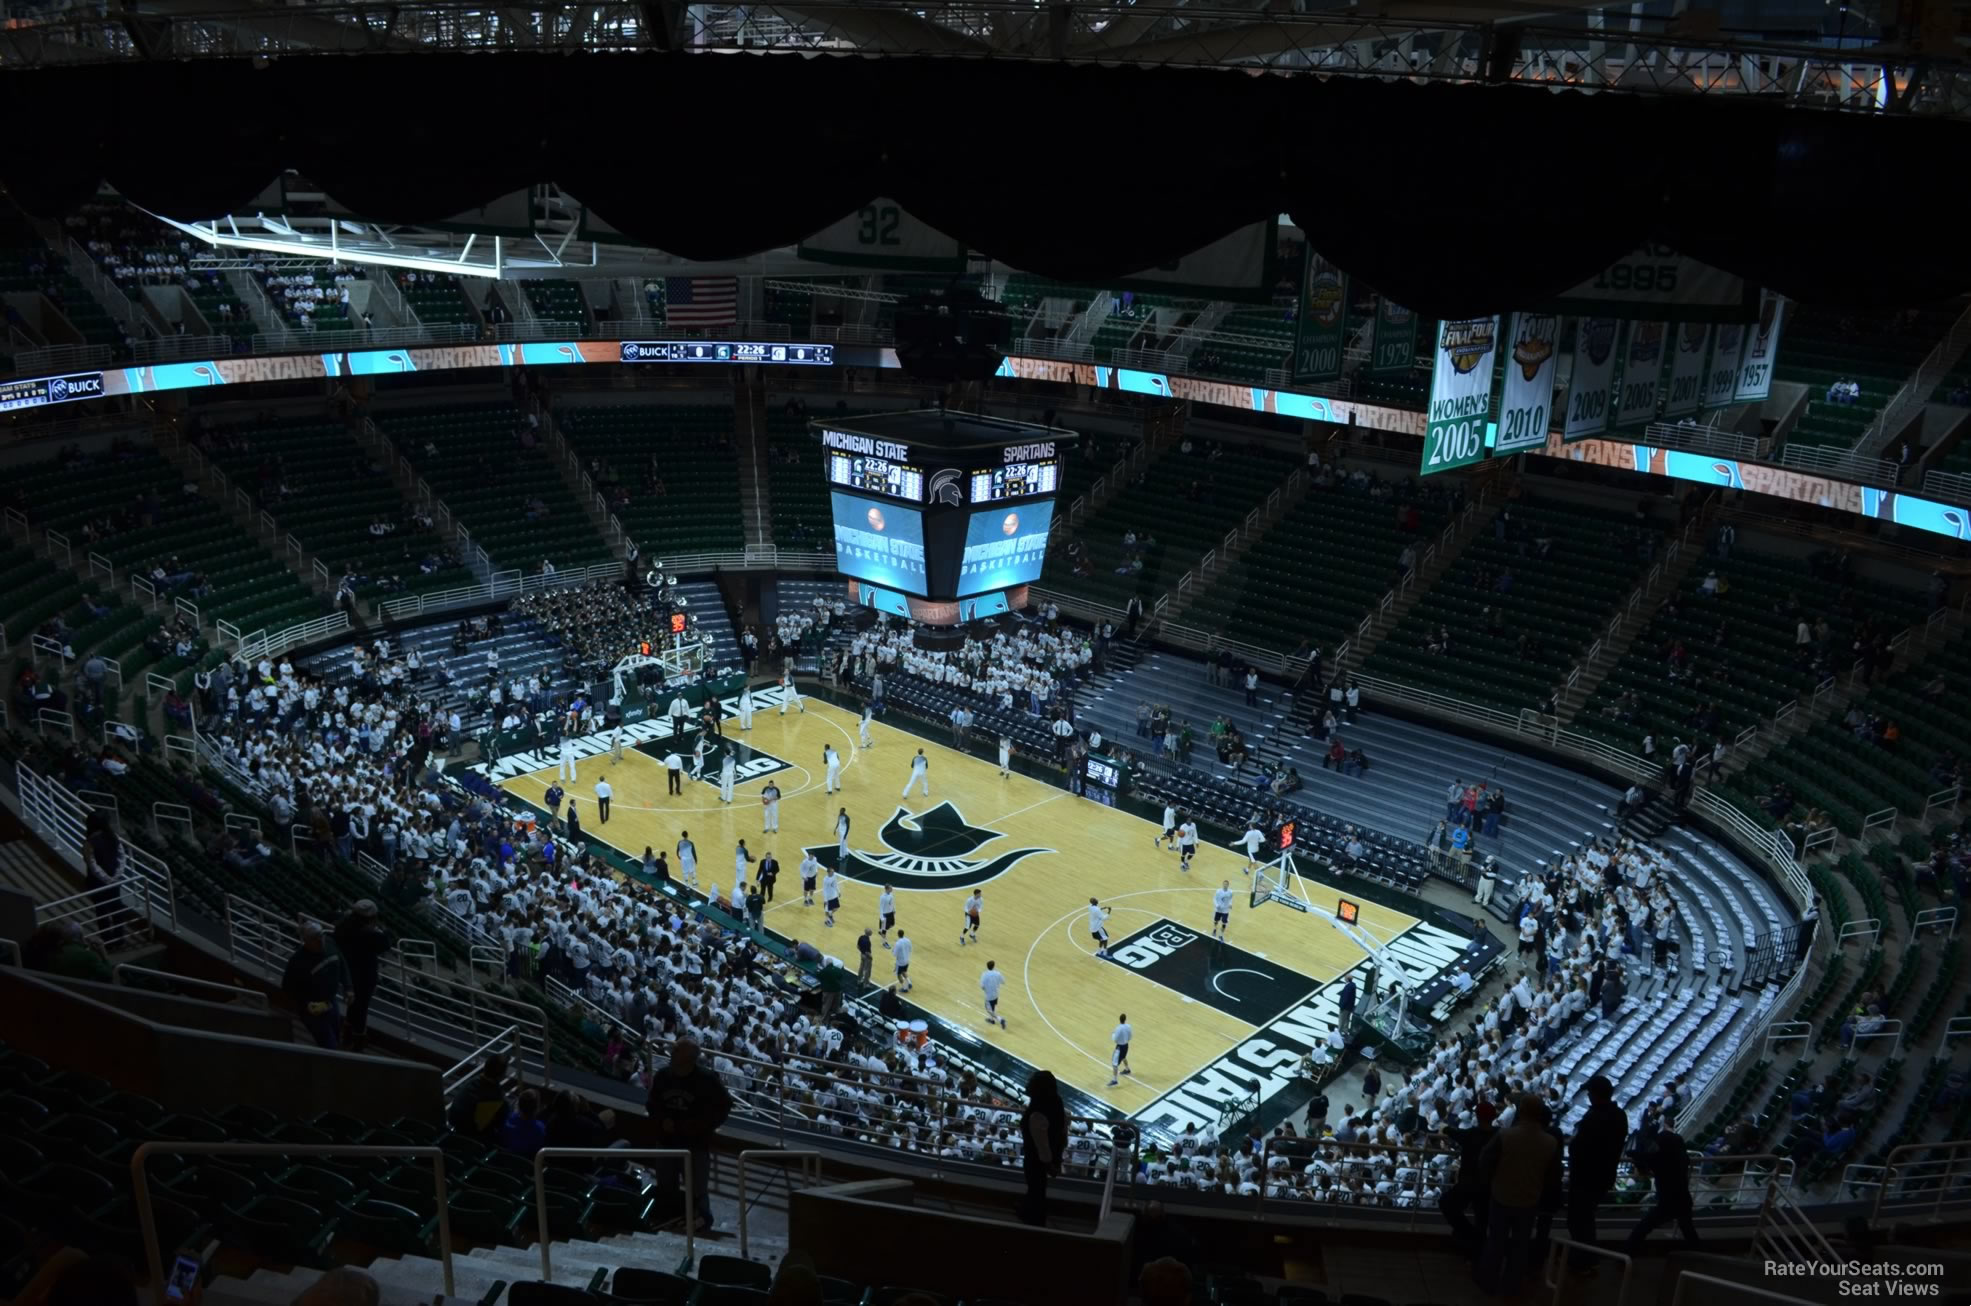 section 205, row 15 seat view  - breslin center